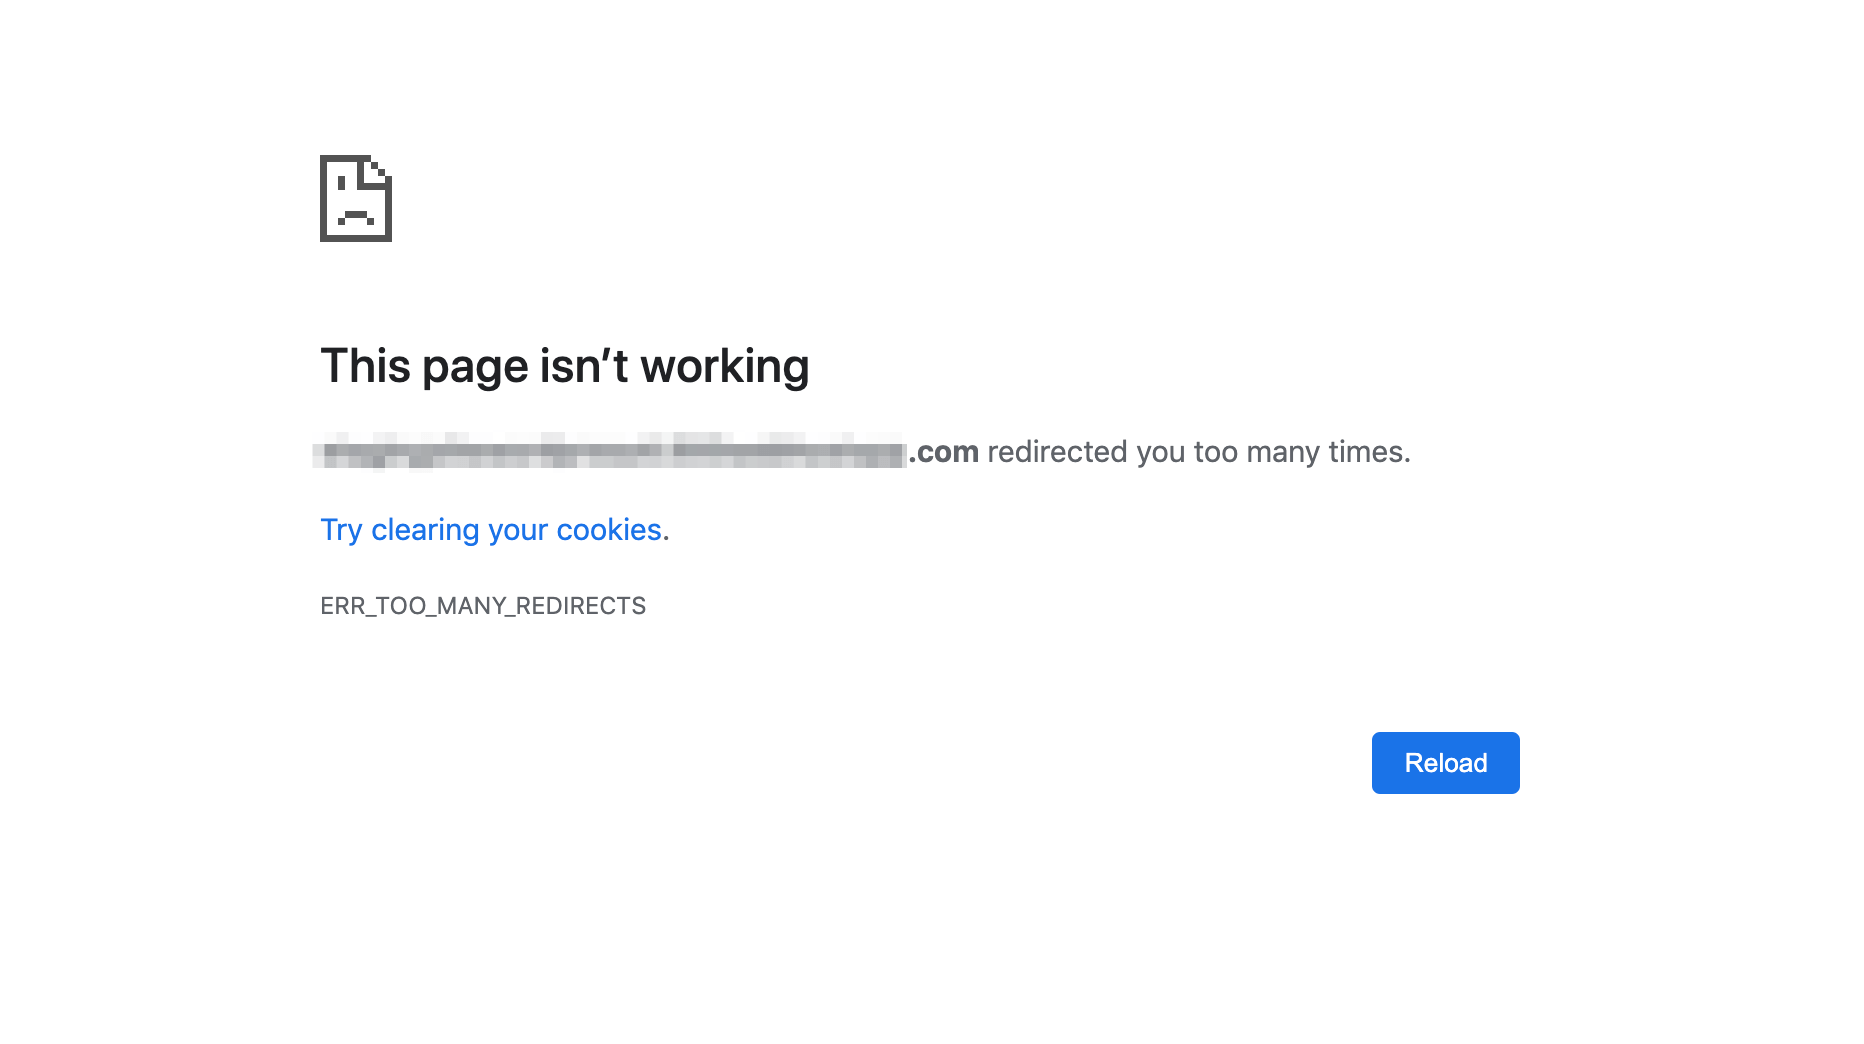 The 'err_too_many_redirects' message in Chrome.